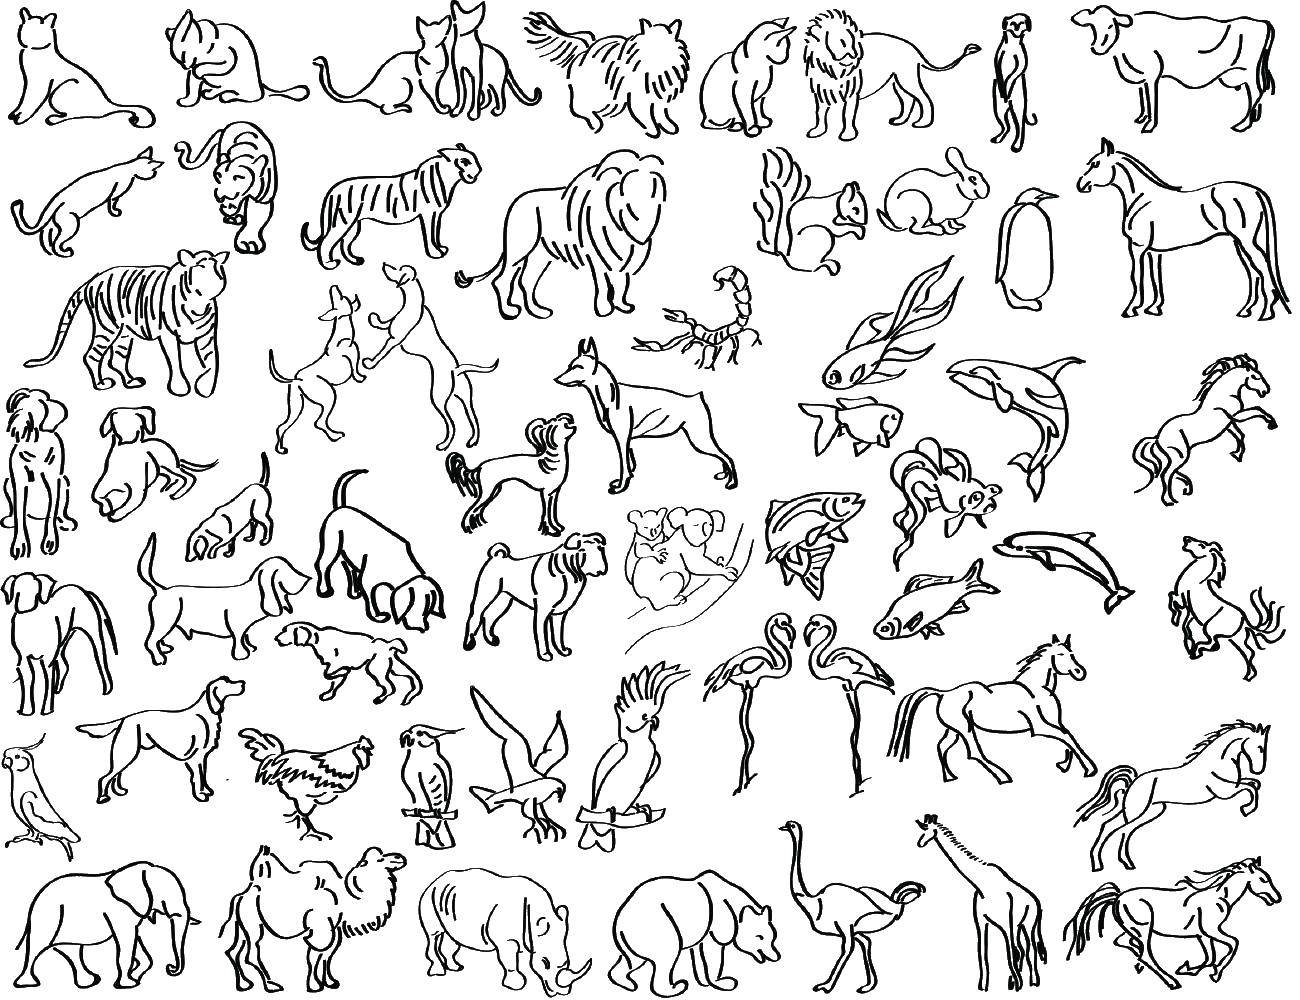 Coloring All the animals together. Category The contours of animals. Tags:  animals.